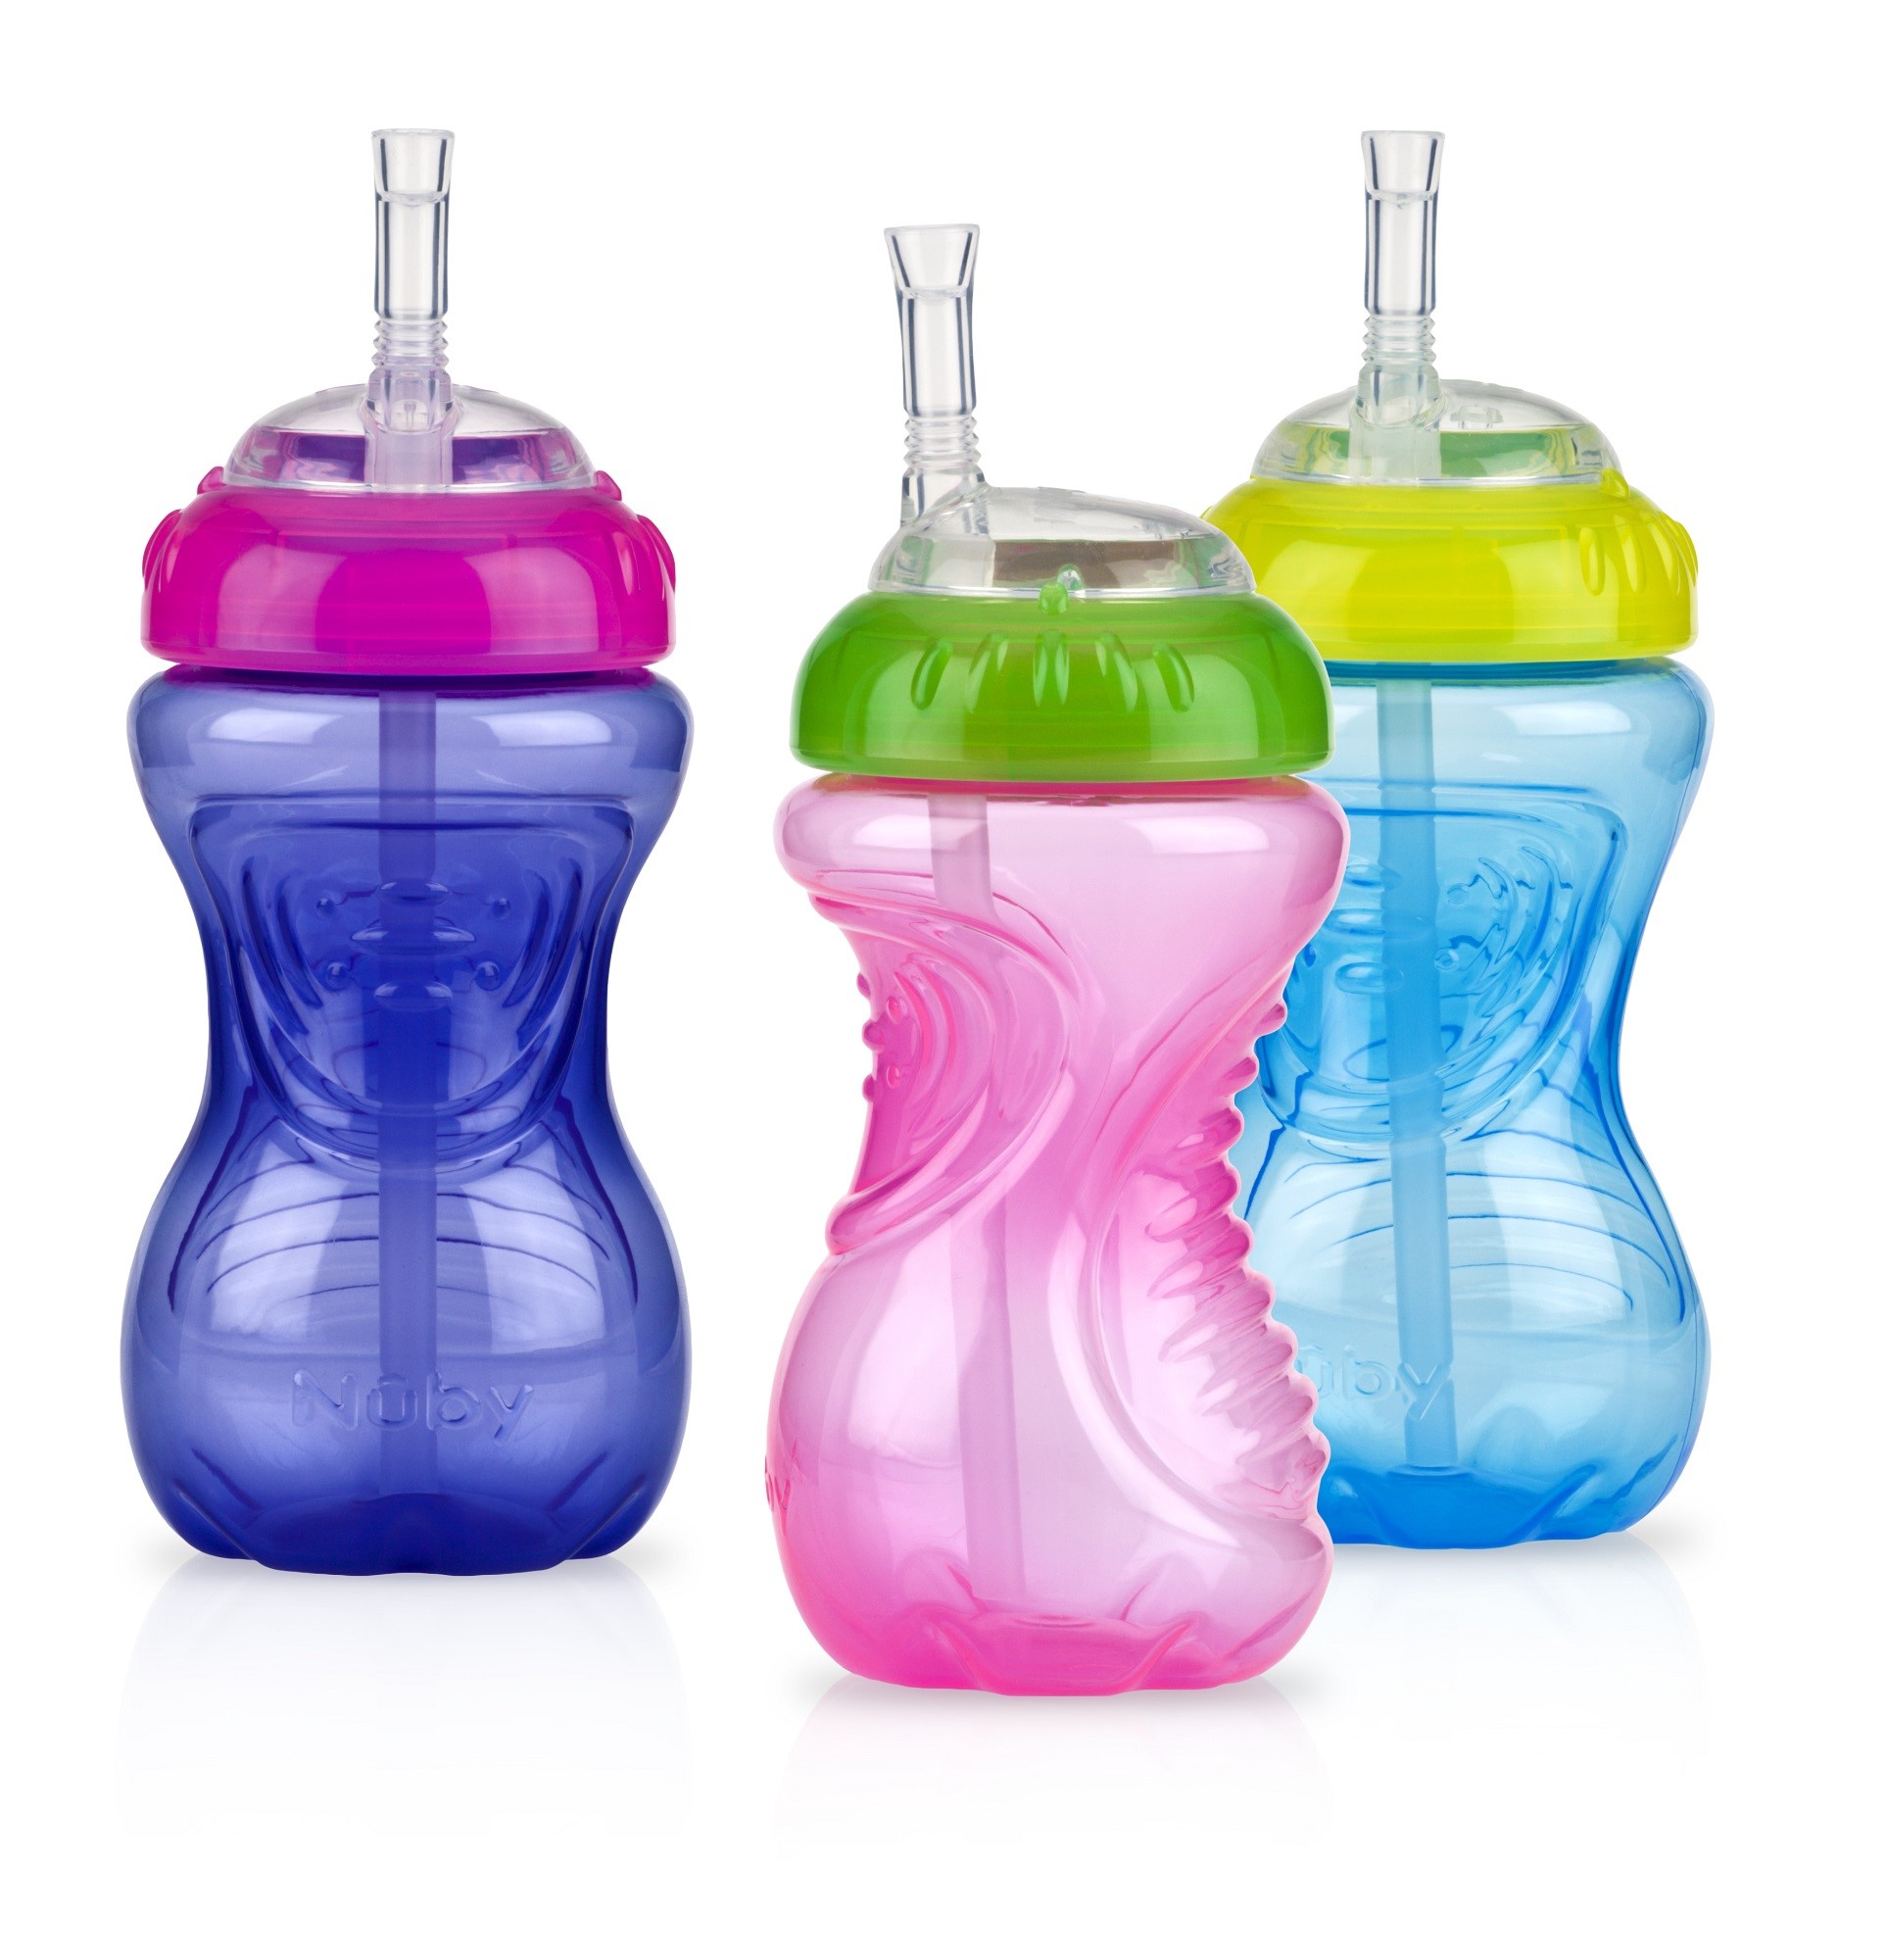 Nuby Easy Grip Soft Straw Sippy Cup, Multicolor, 10 fl oz, 3 Count - image 1 of 3